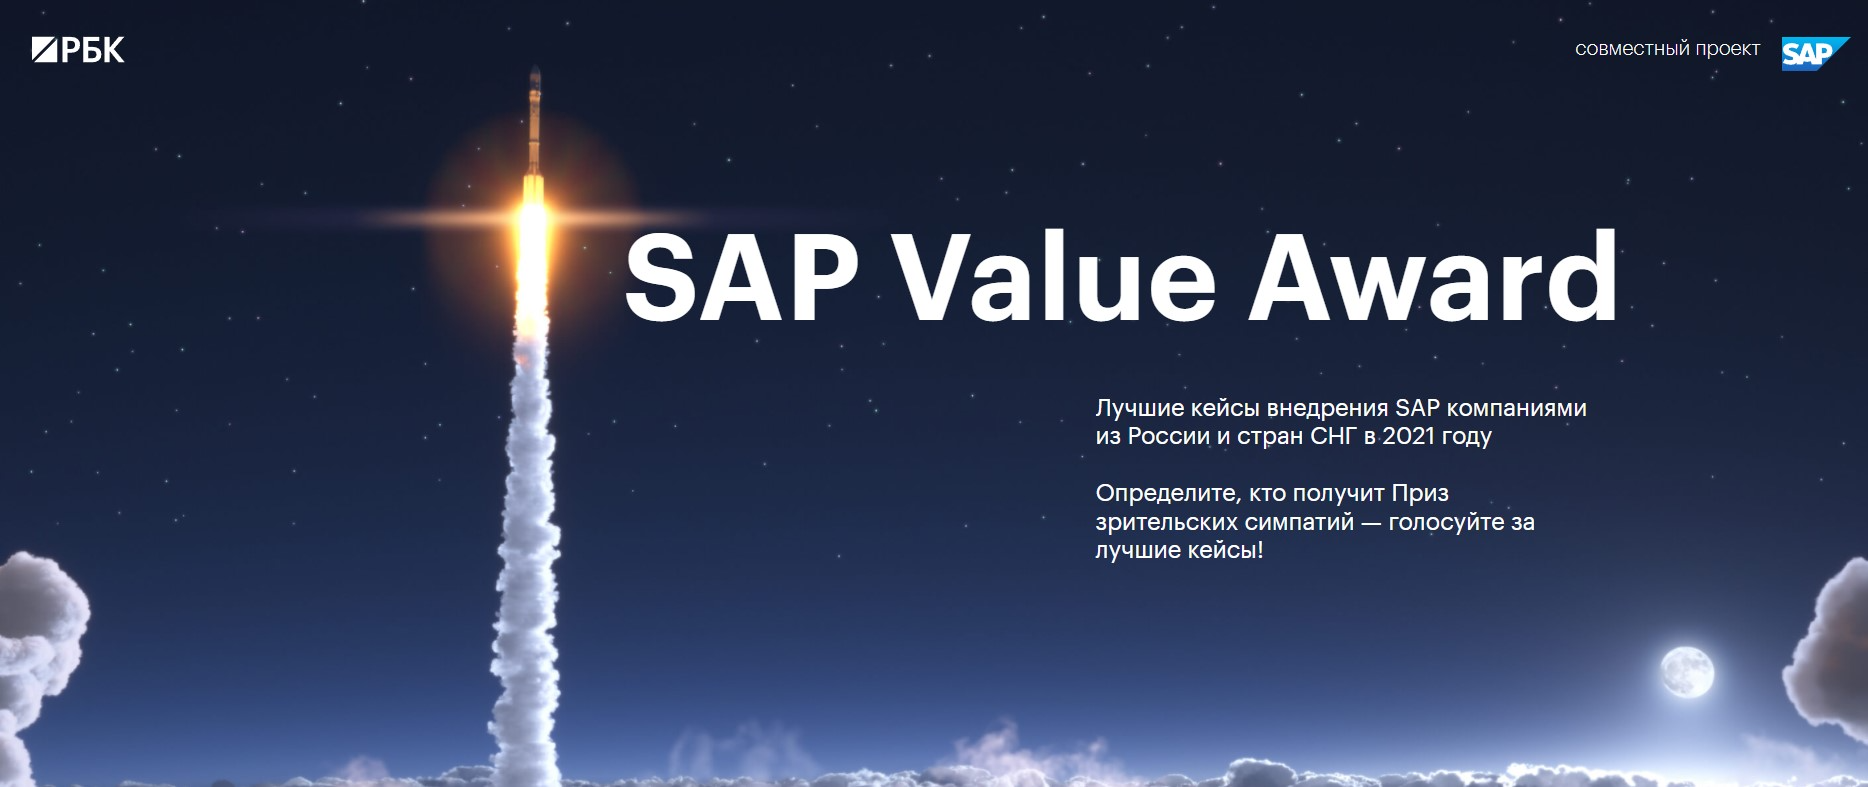 Ruspolymet PJSC has become a finalist for the SAP Value Award 2021.